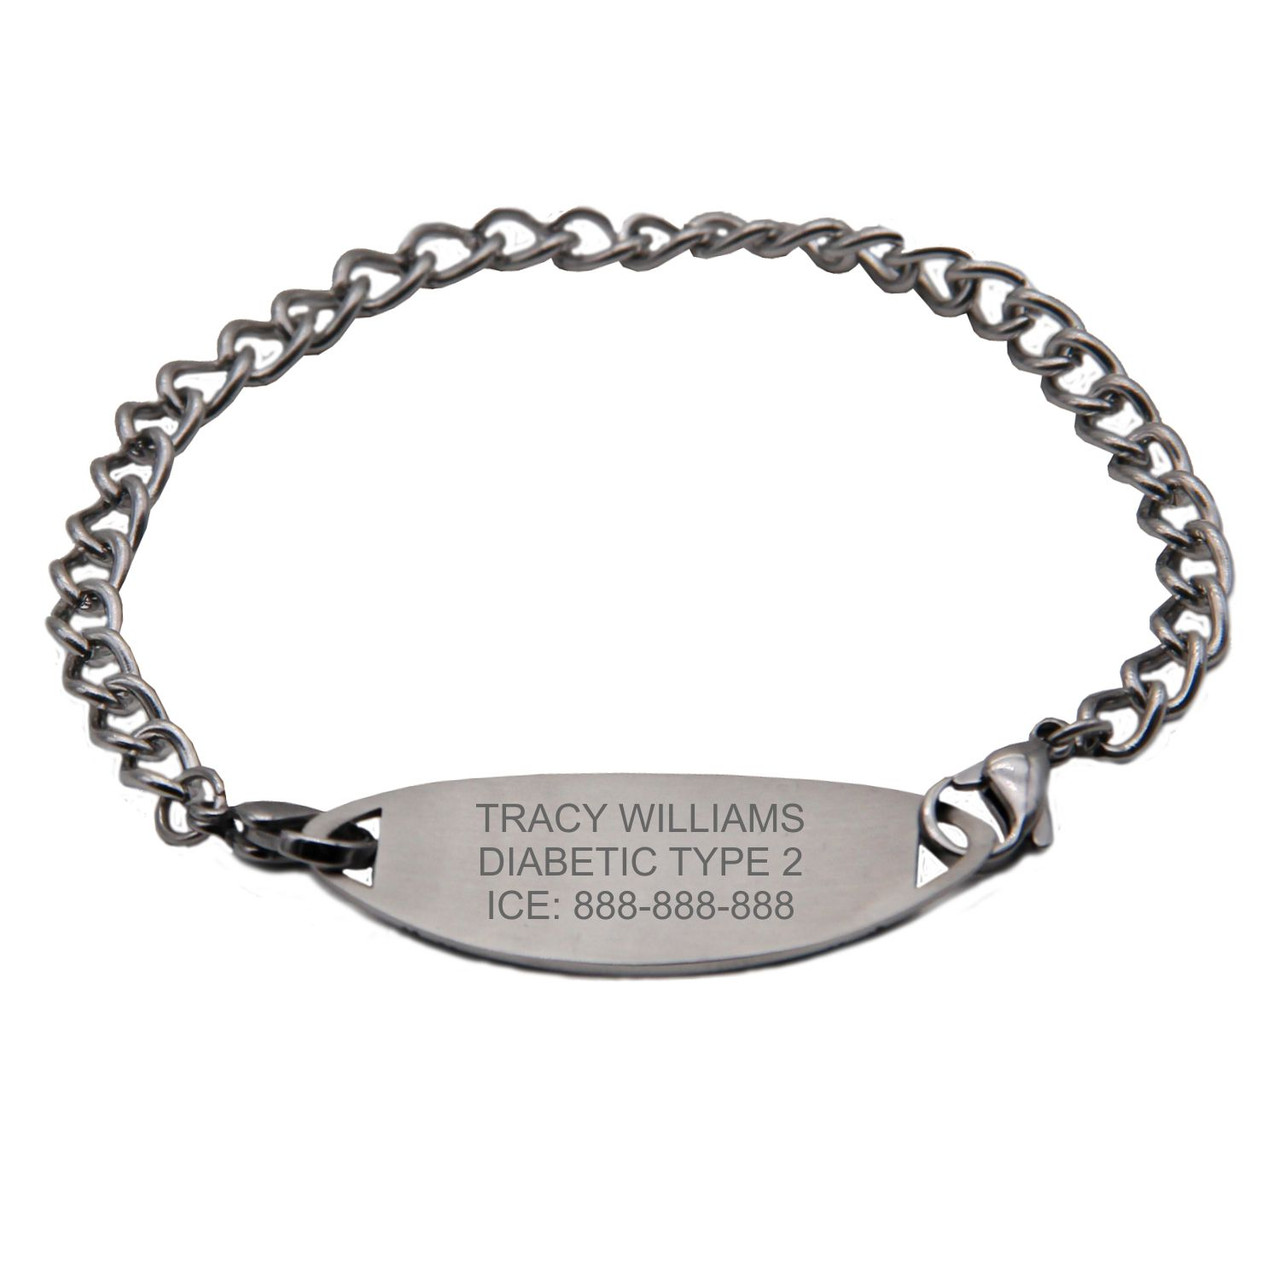 Personalized Quality Medical Alert ID Bracelet - ForeverGifts.com